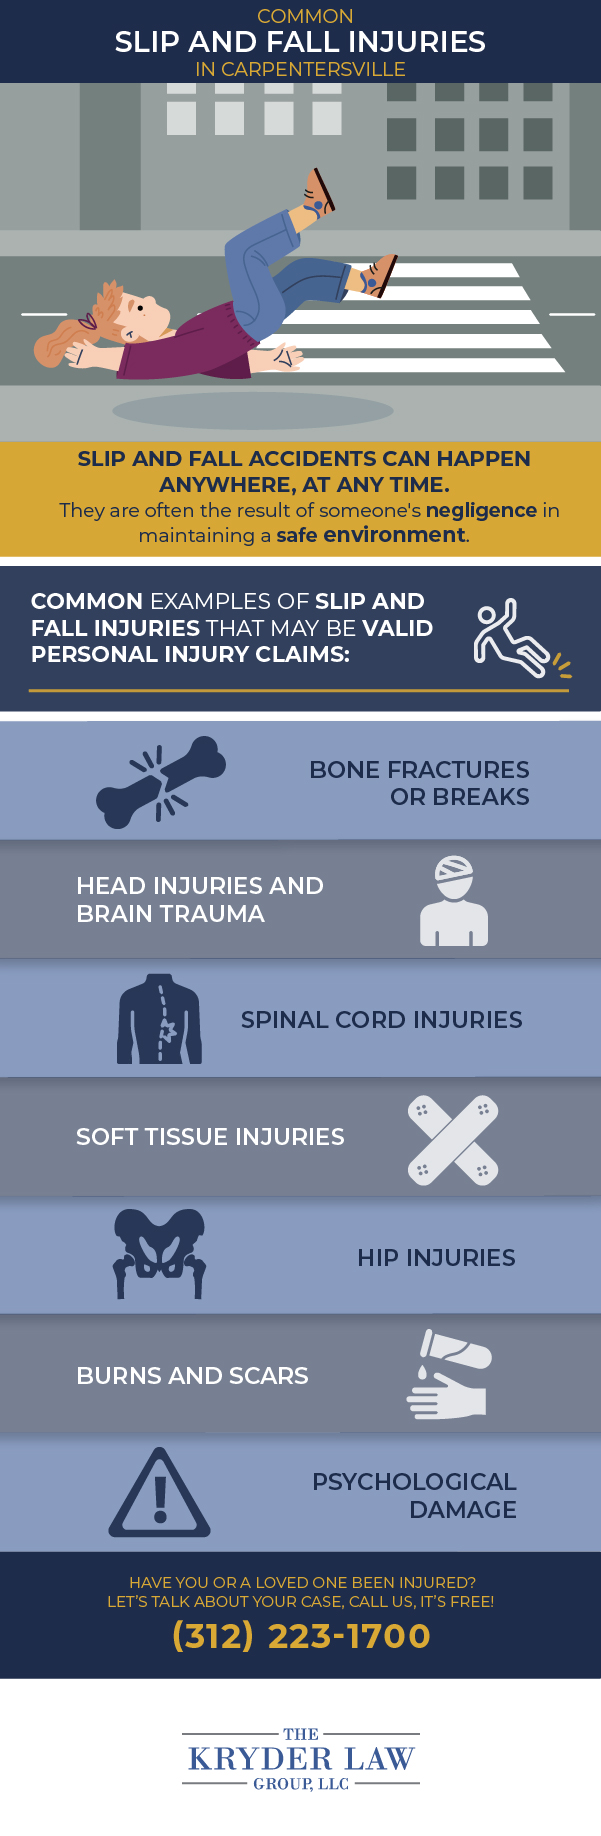 The Benefits of Hiring a Carpentersville Slip and Fall Injury Lawyer Infographic